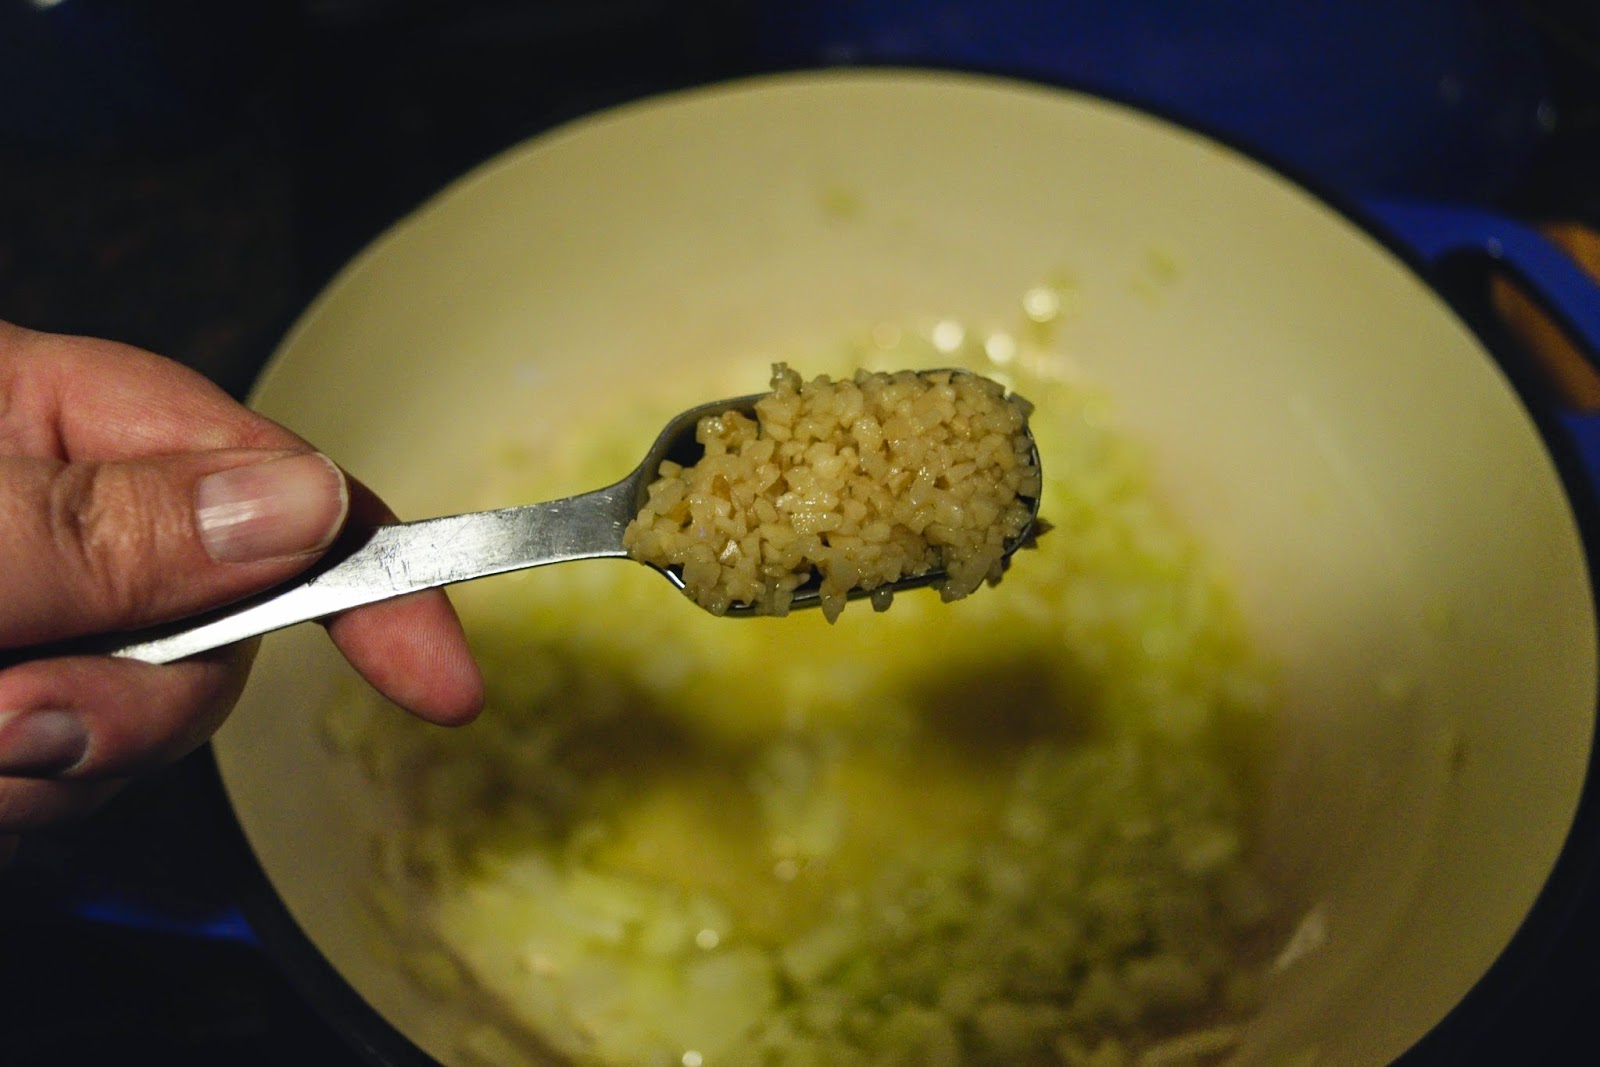 The minced garlic being added to the pot with a metal measuring spoon.